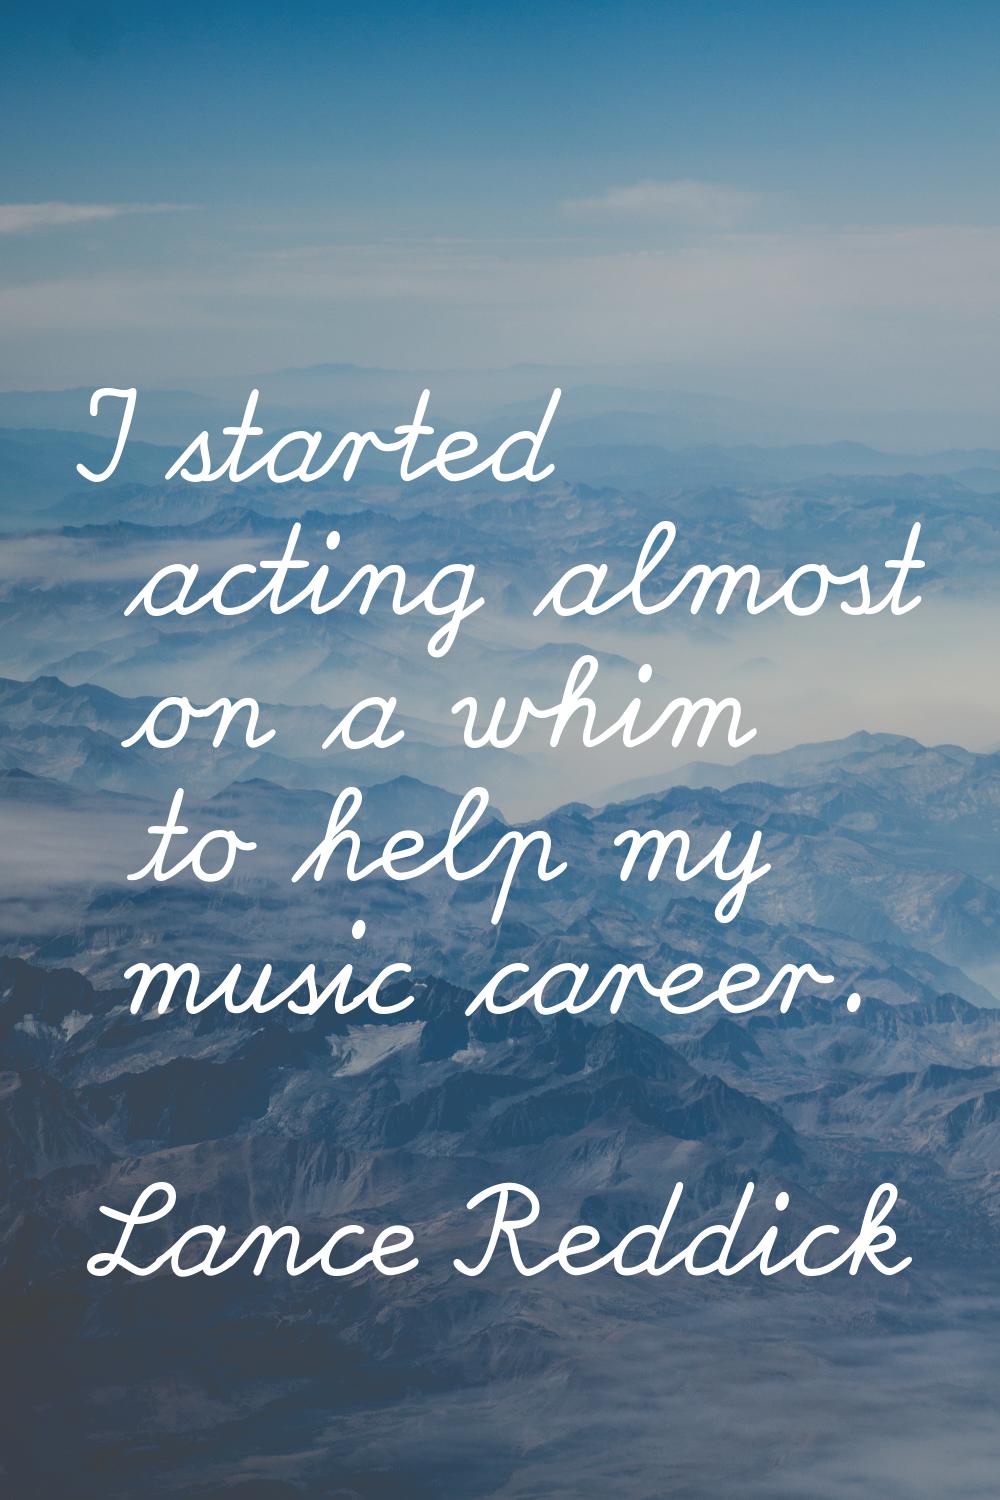 I started acting almost on a whim to help my music career.